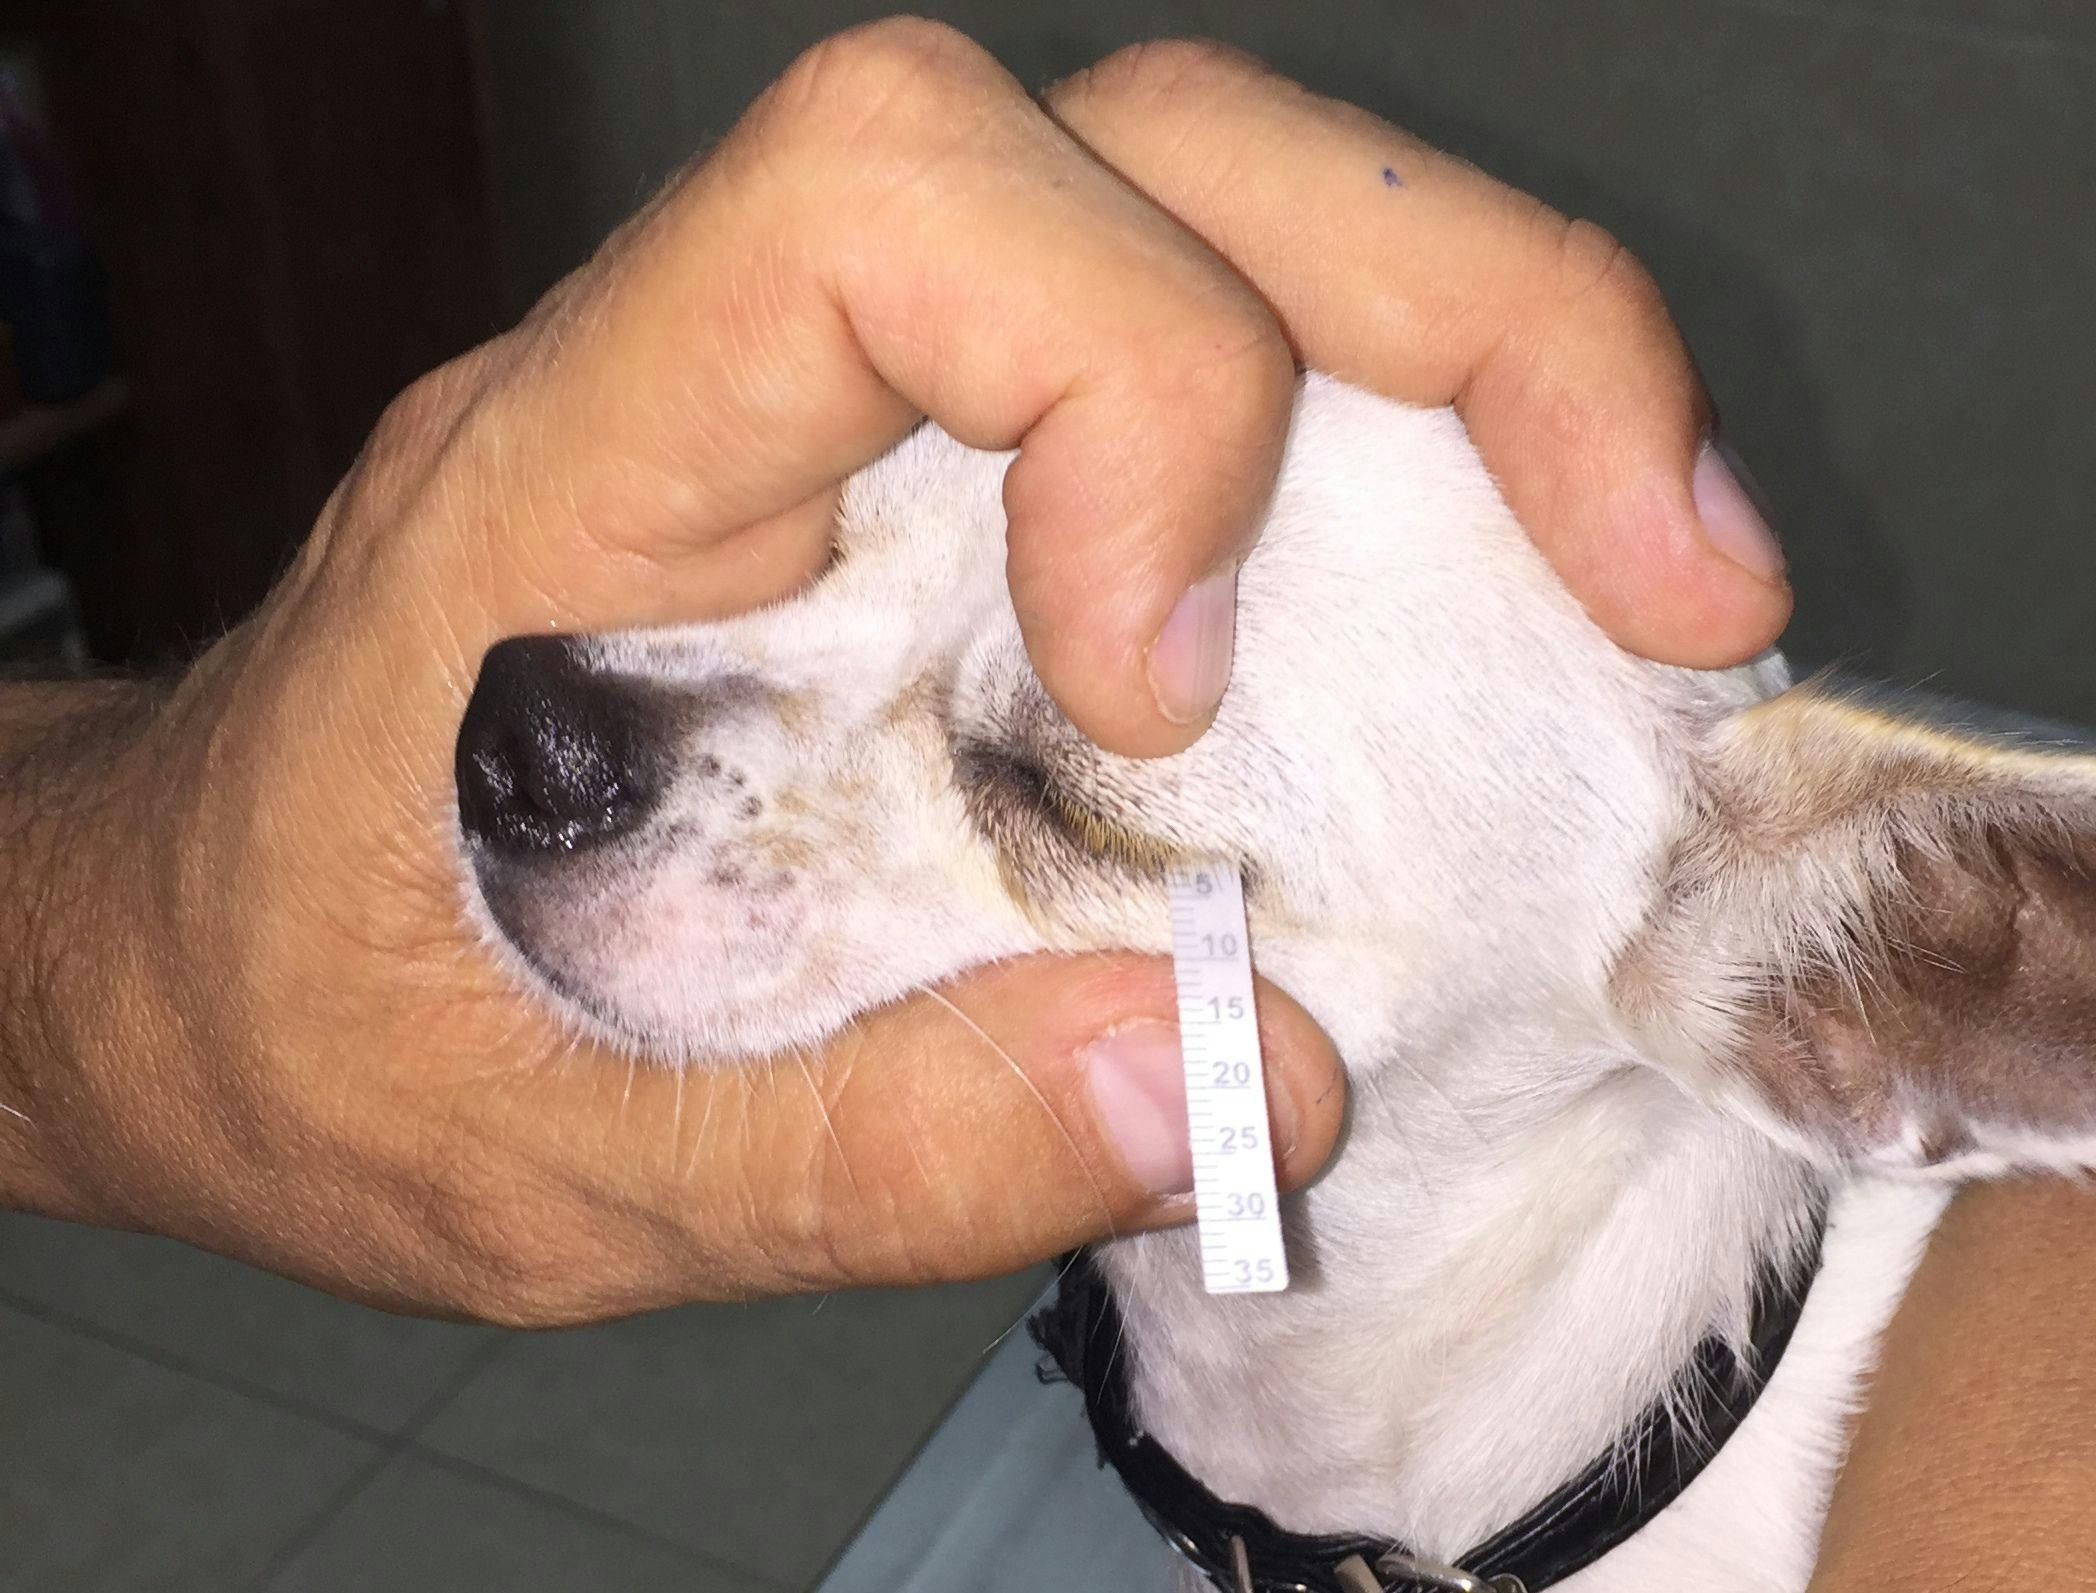 Figure 5. Schirmer tear test 1 being conducted in a dog. Values of less than 15 mm/minute wetting of the test trip, in conjunction with the clinical signs seen in Figures 1 through 4, are pathognomonic of the disease.